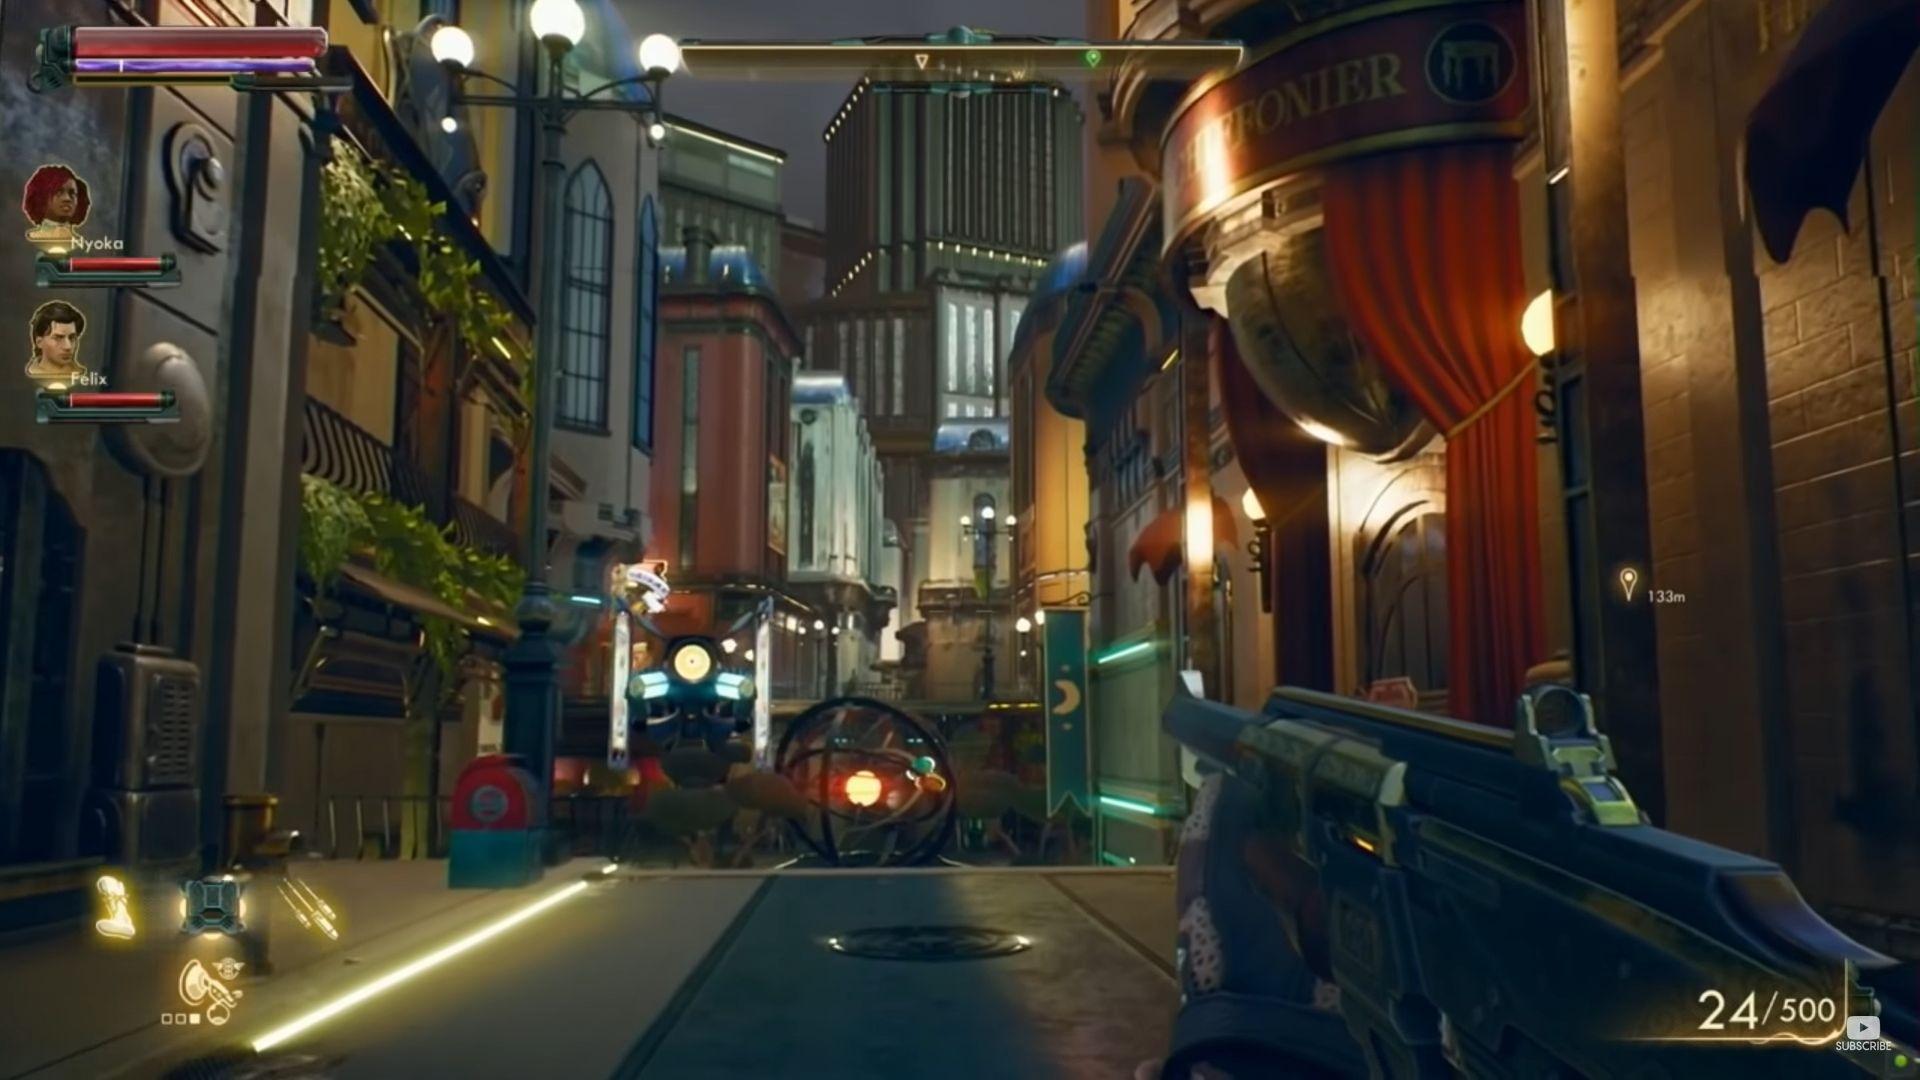 The Outer Worlds Gameplay Shown at PAX East 2019